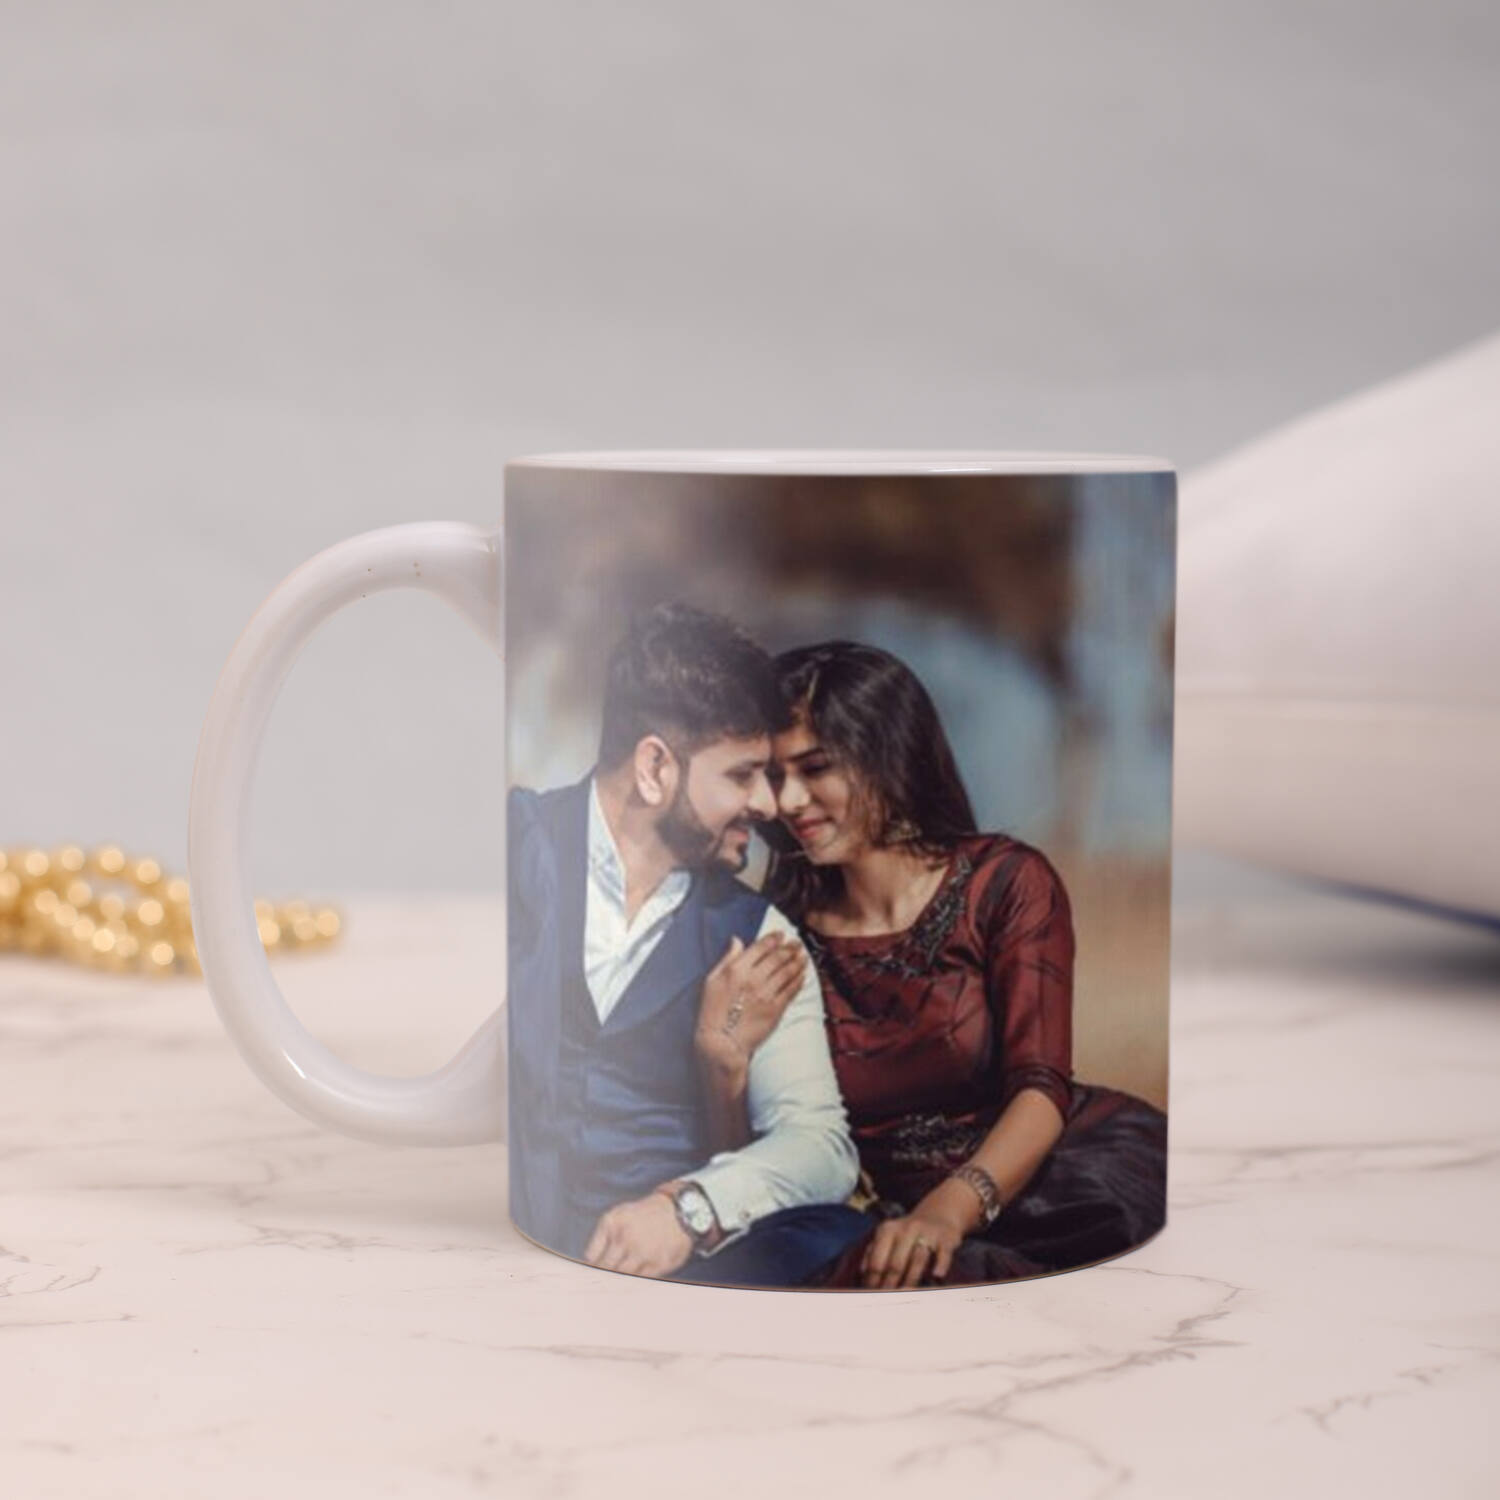 35 Gifts for Your Fiancé Thatll Make Em Glad They Picked You